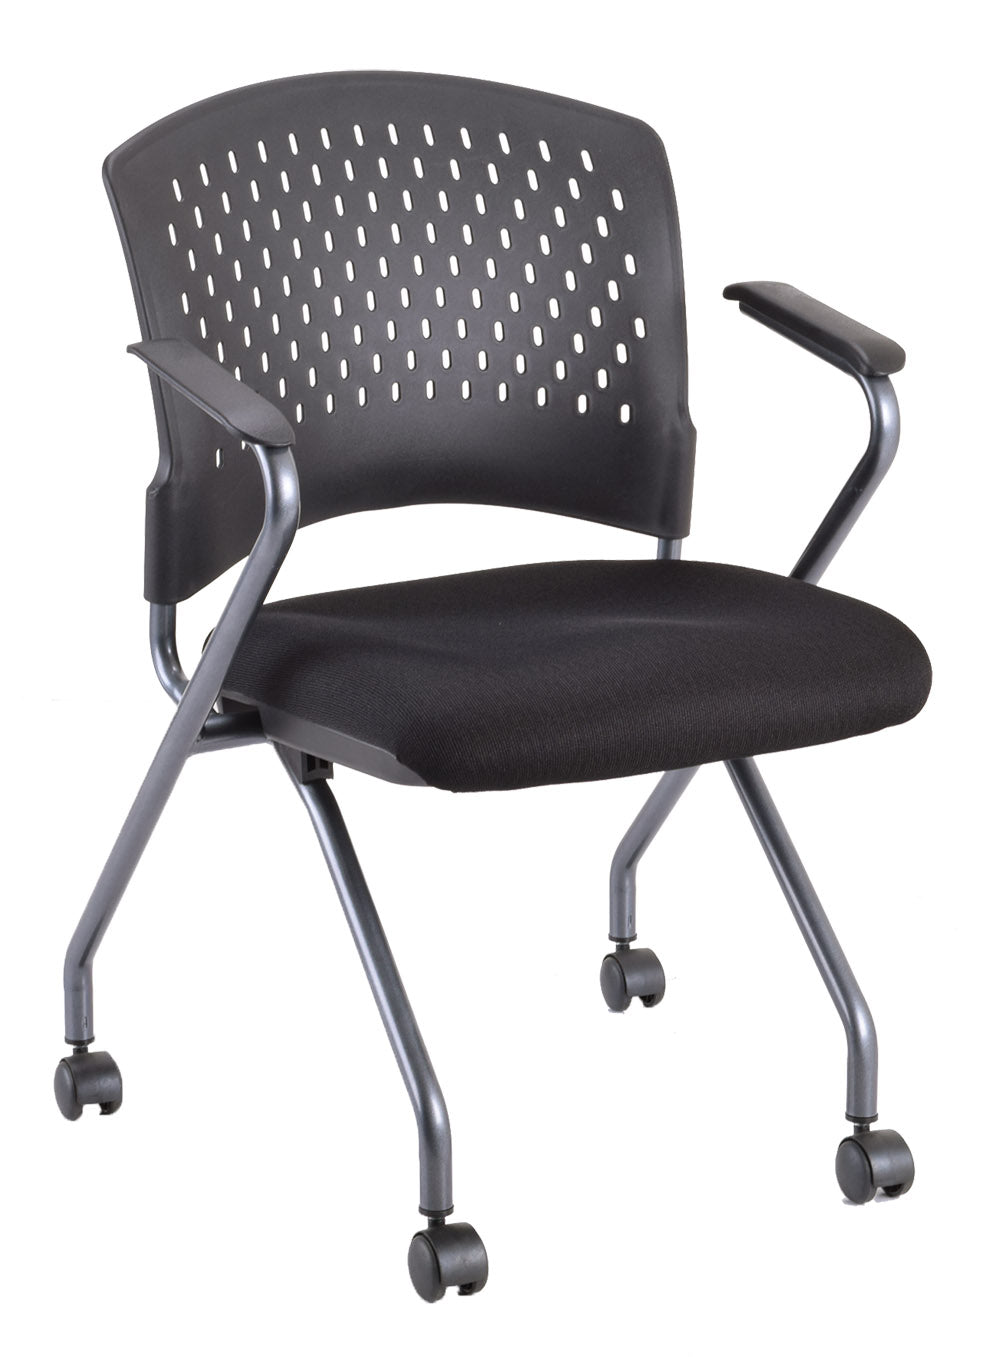 Agenda Nesting Chair with Arms